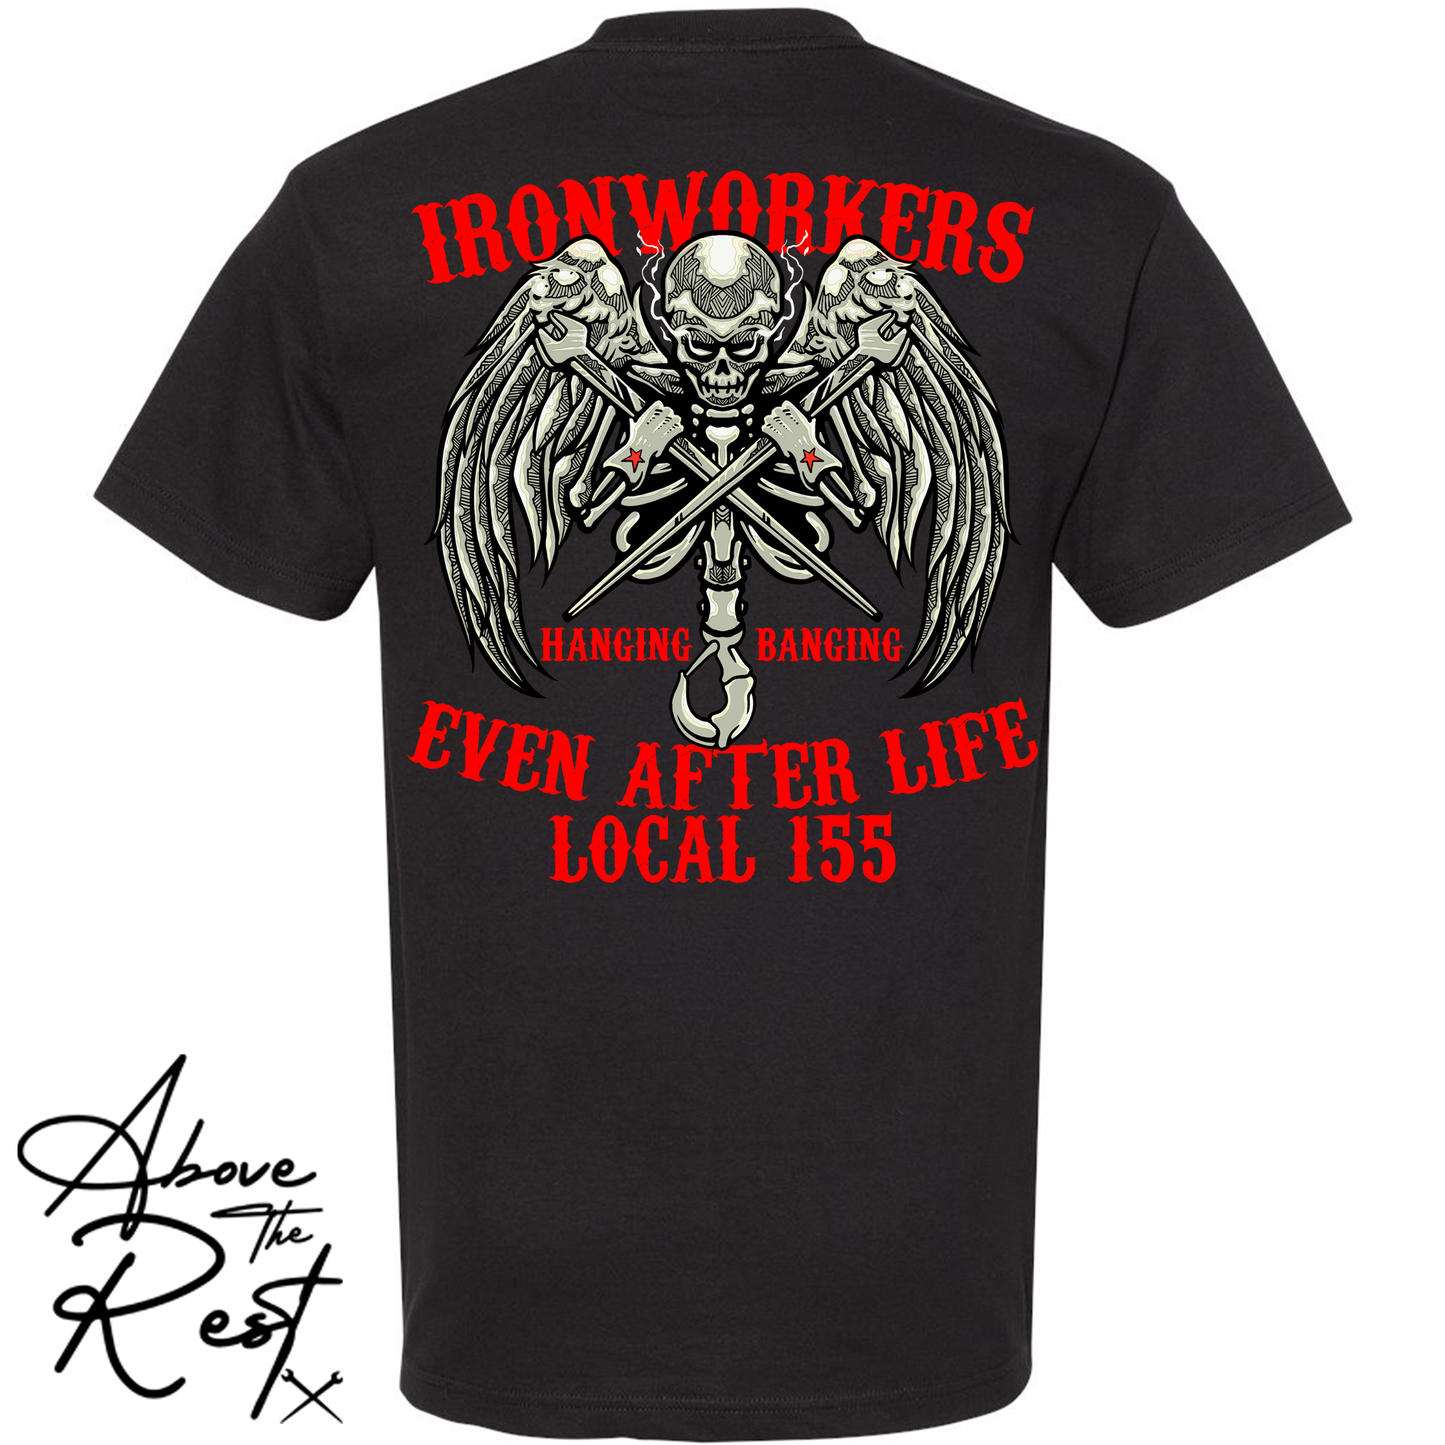 EVEN AFTER LIFE LOCAL 155 T-SHIRT